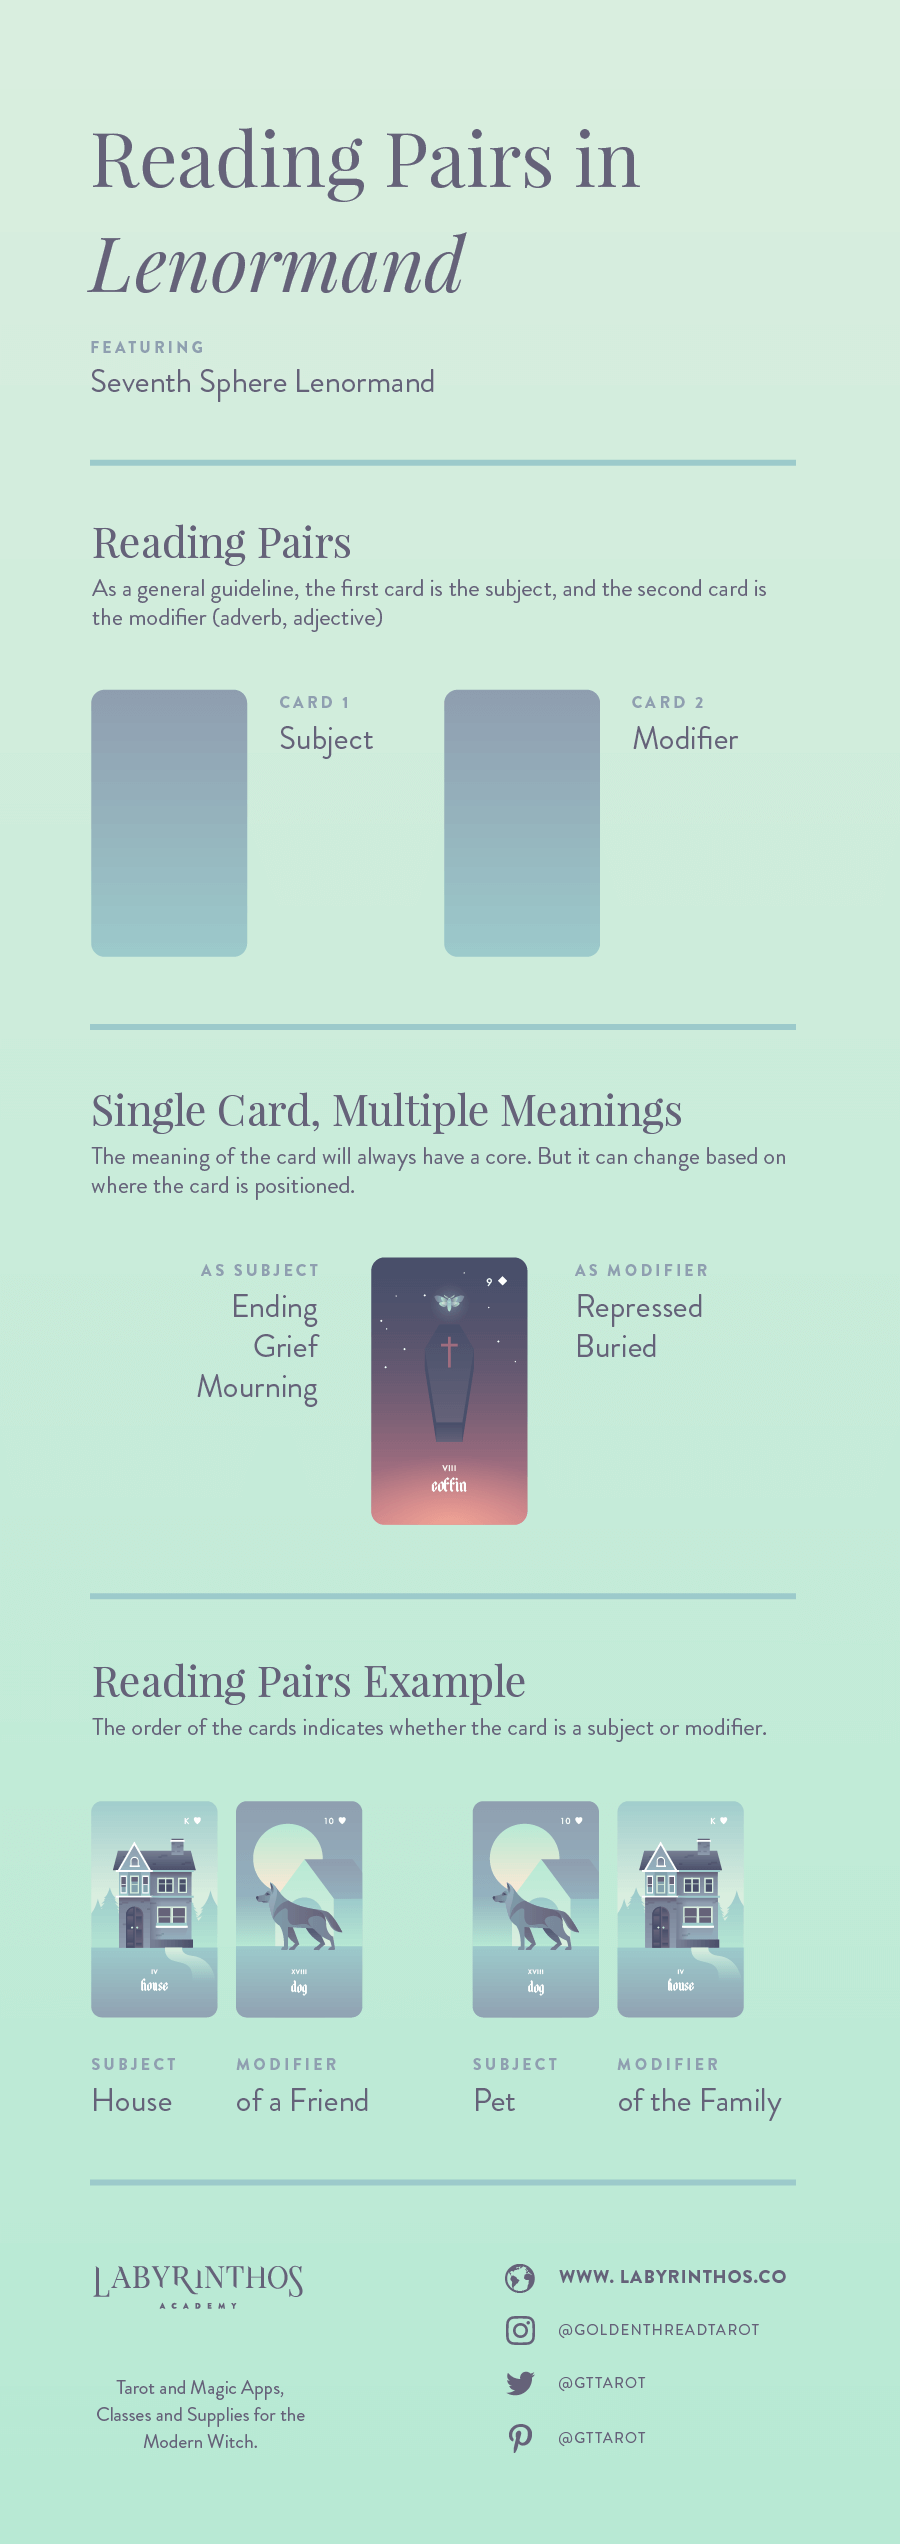 How to Read Lenormand Pairs - Full Infographic